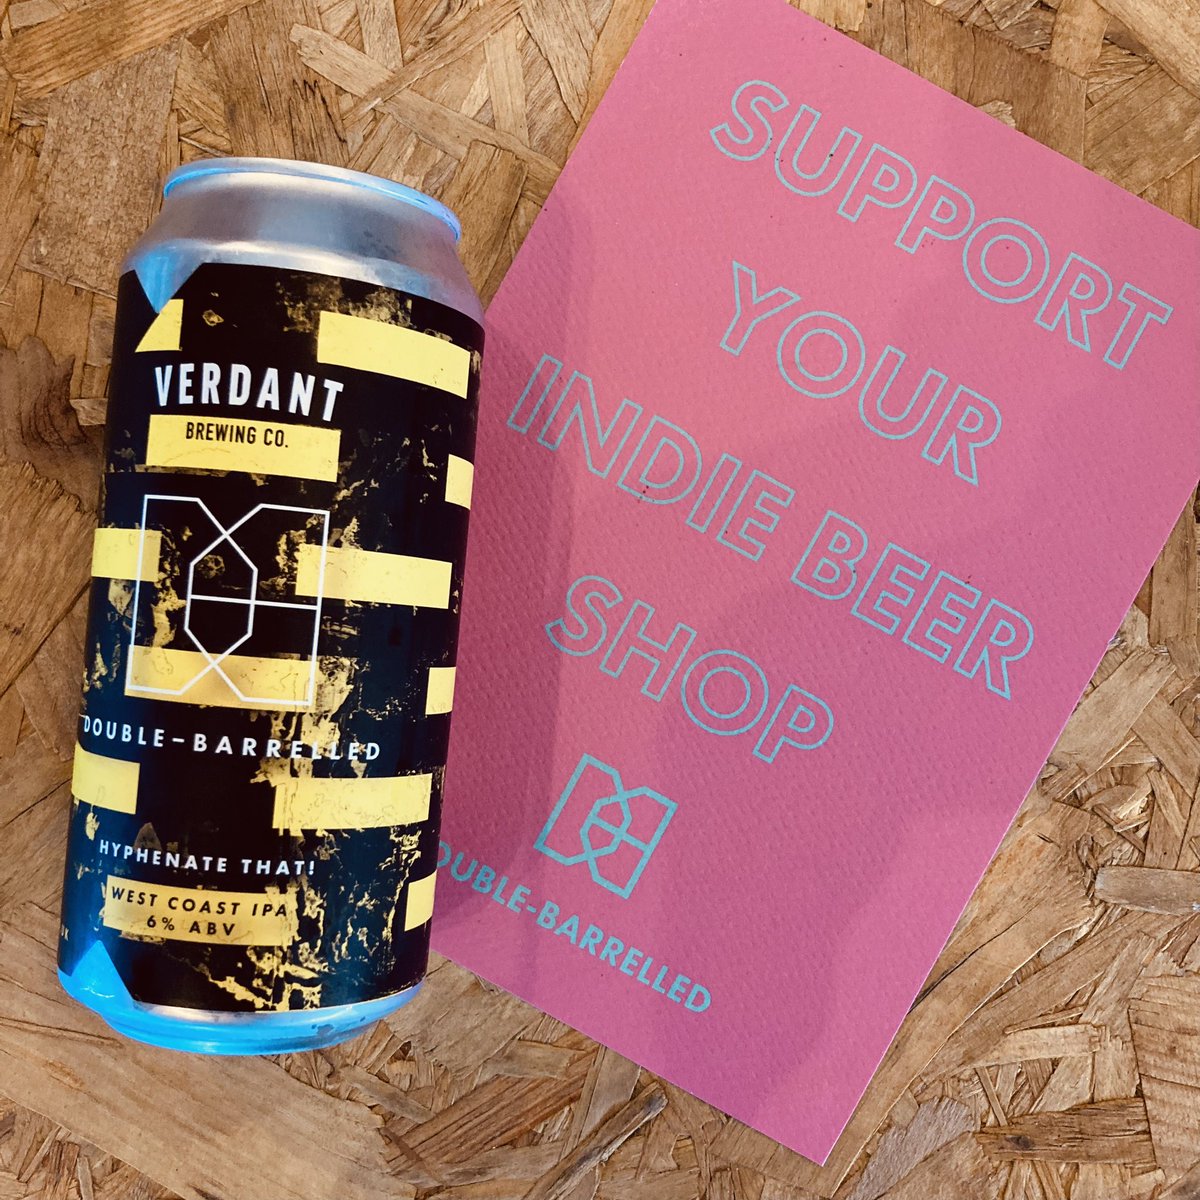 It’s so crazy right now… so why not get this FRESH @DBBrewery x @VerdantBrew colab. We’re the only place we know of locally with this beer which is rather exciting. Our mates at DB got a case to us hot off the canning line. It was only canned on Wednesday!